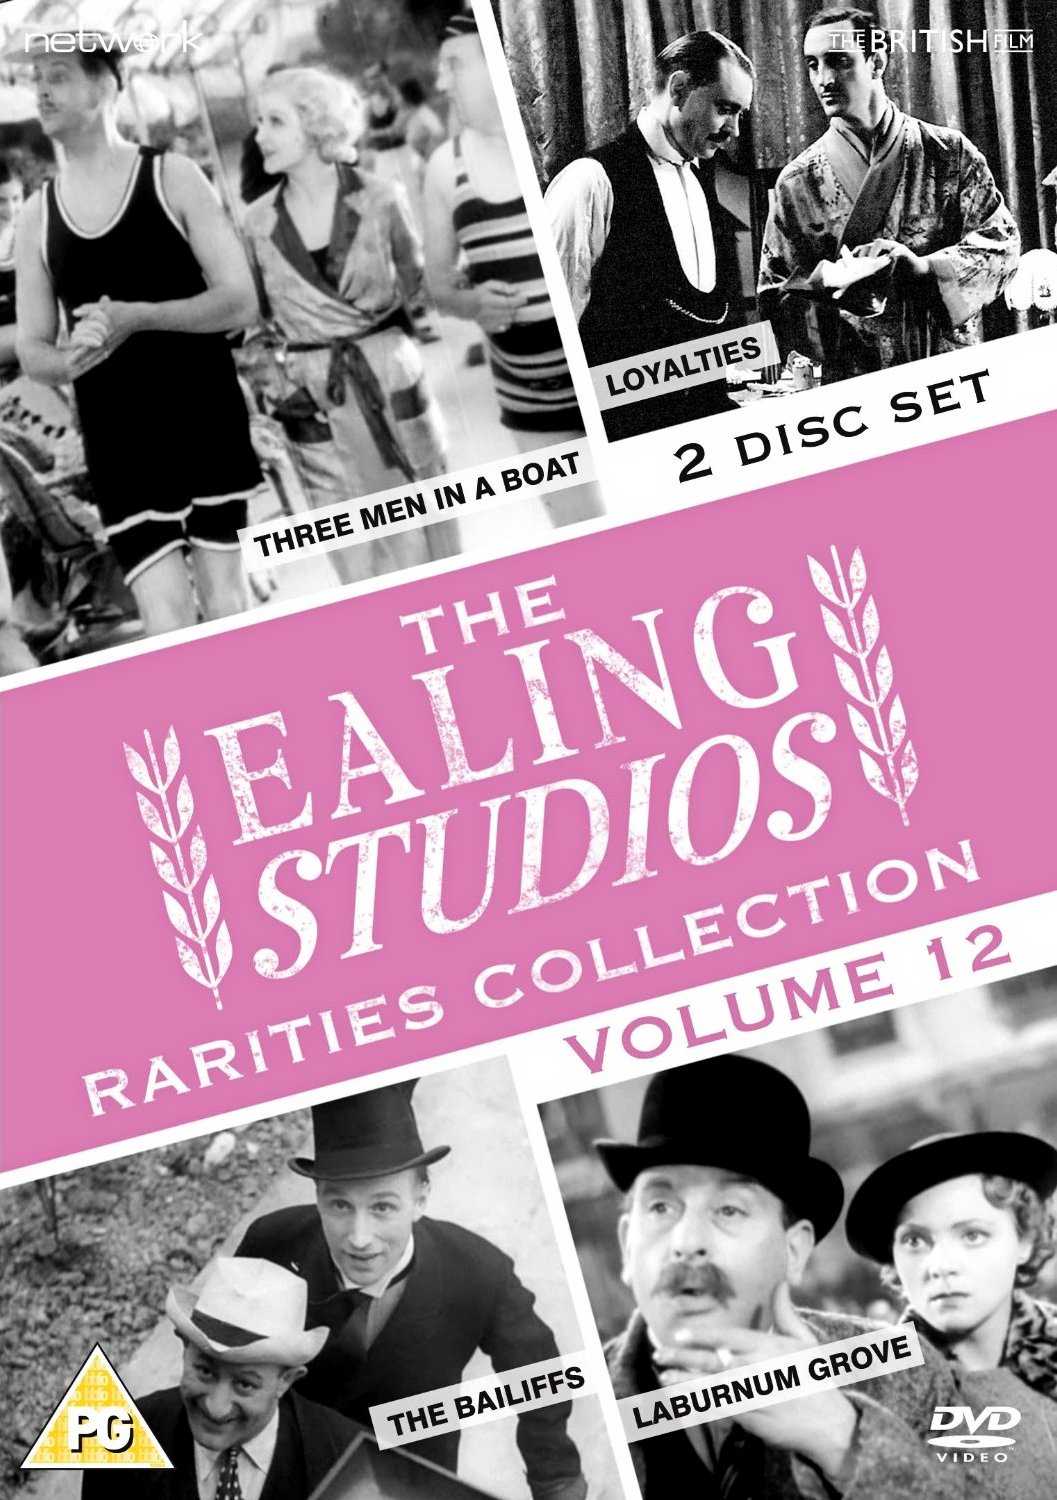 The Ealing Studios Rarities Collection – Volume 12 from Network and The British Film.  Features Three Men in a Boat, Loyalties, The Bailiffs and Laburnum Grove